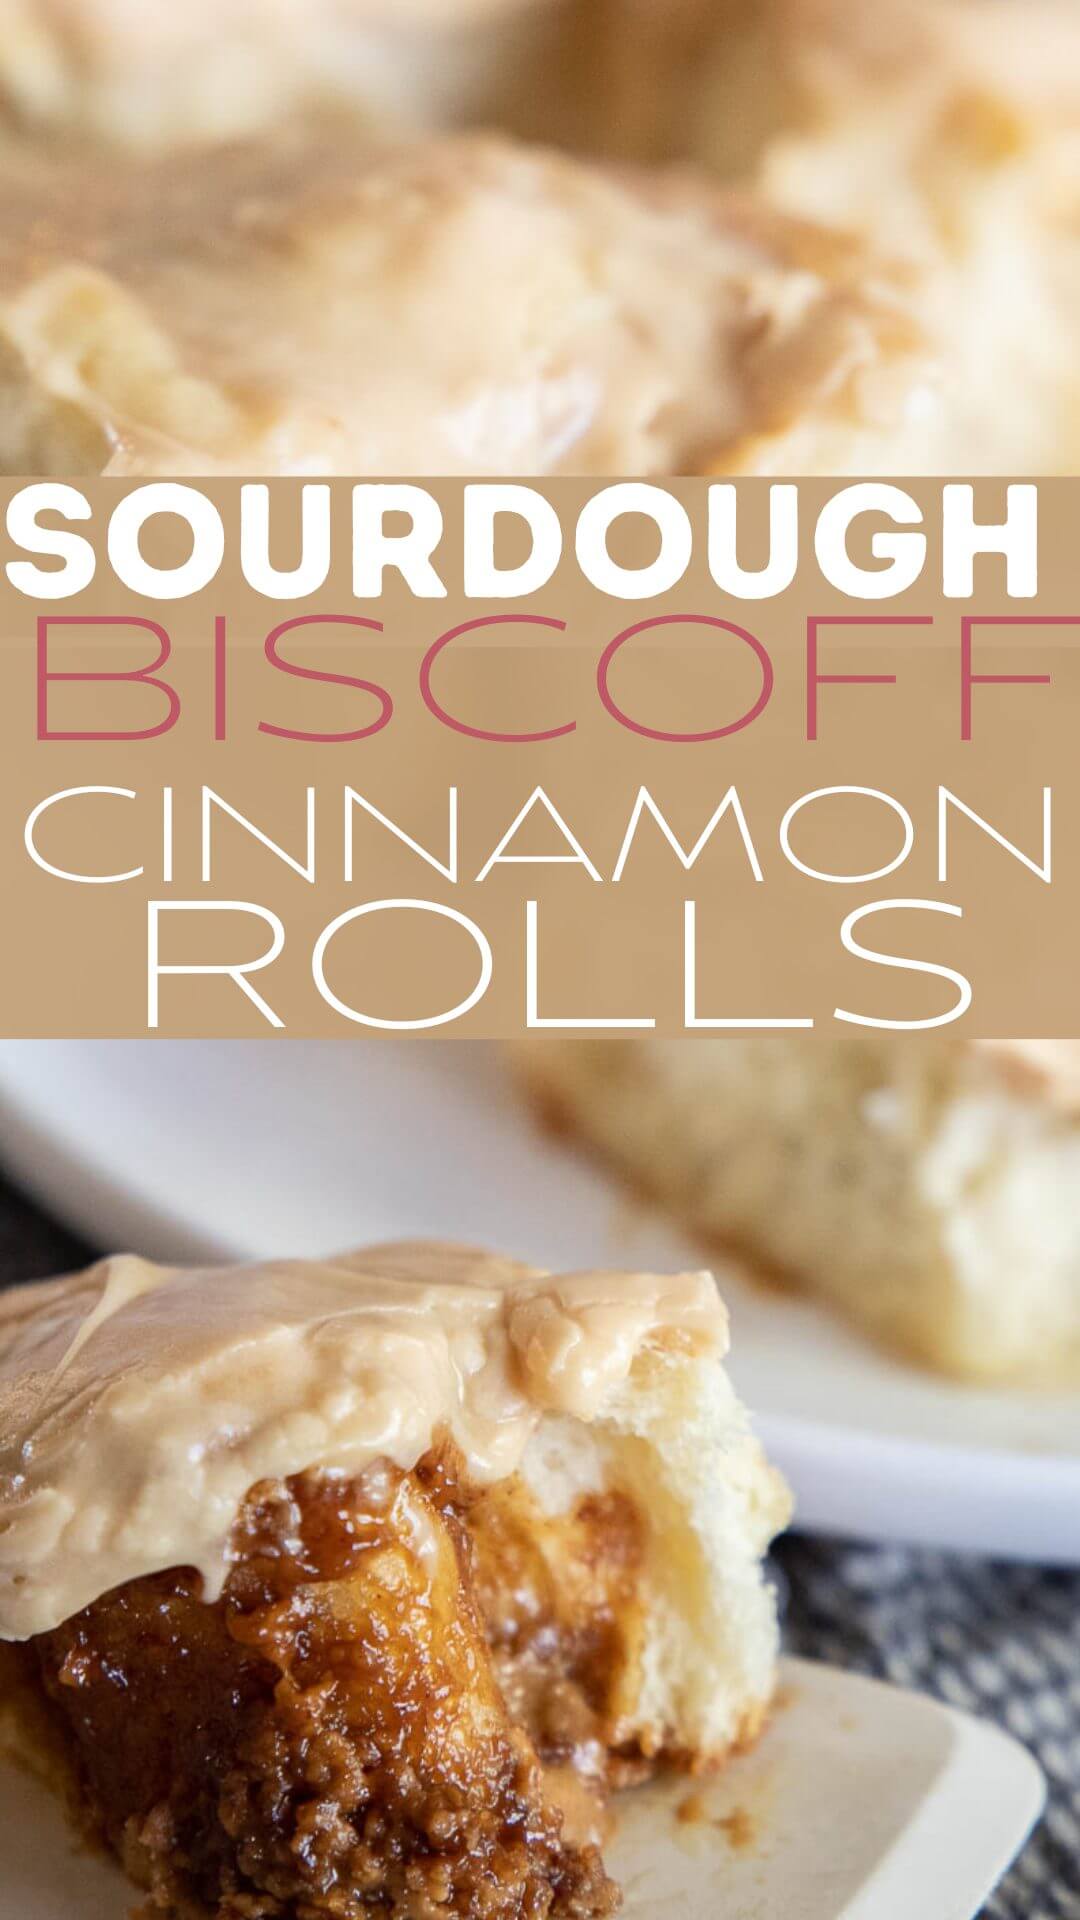 Make these amazing sourdough discard Biscoff dessert rolls! They are soft and fluffy. The cookie butter filling is perfection.